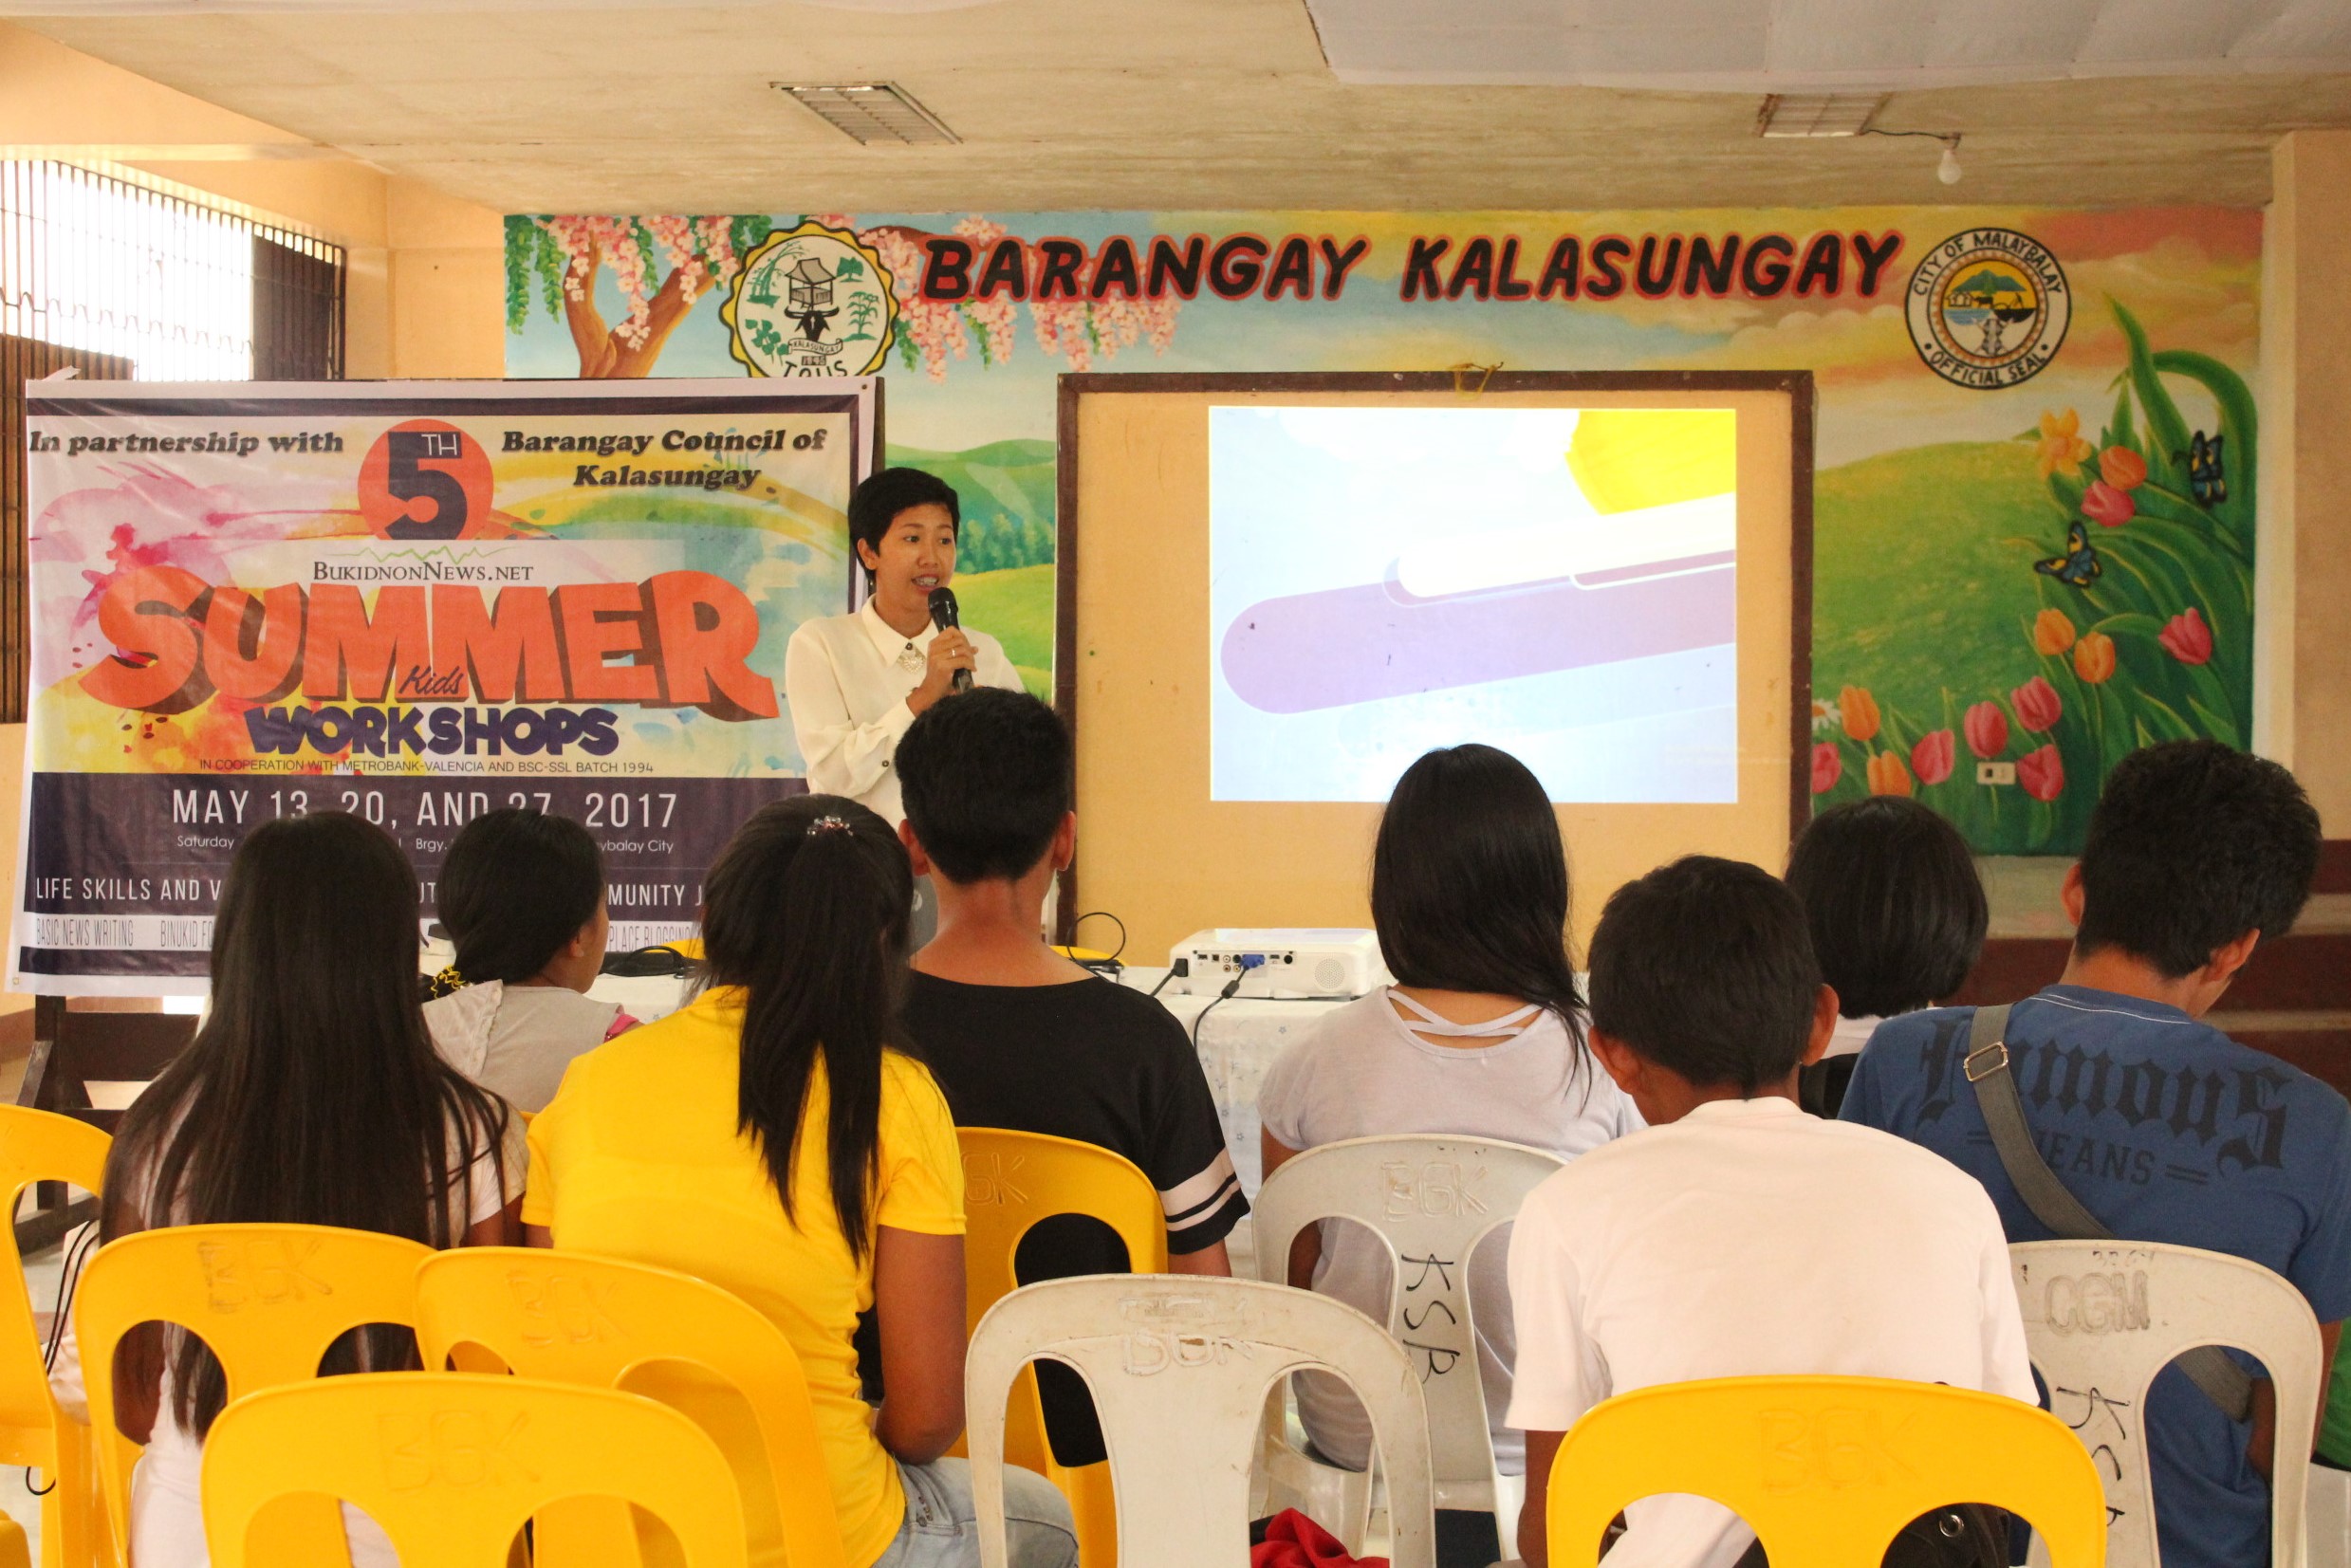 Ms. Iyren Dalipe, one of the resource persons, speaks during the 5th Summer Youth Journalism Workshop in partnership with Brgy. Kalasungay in May 2017/BukidnonNews.Net photo